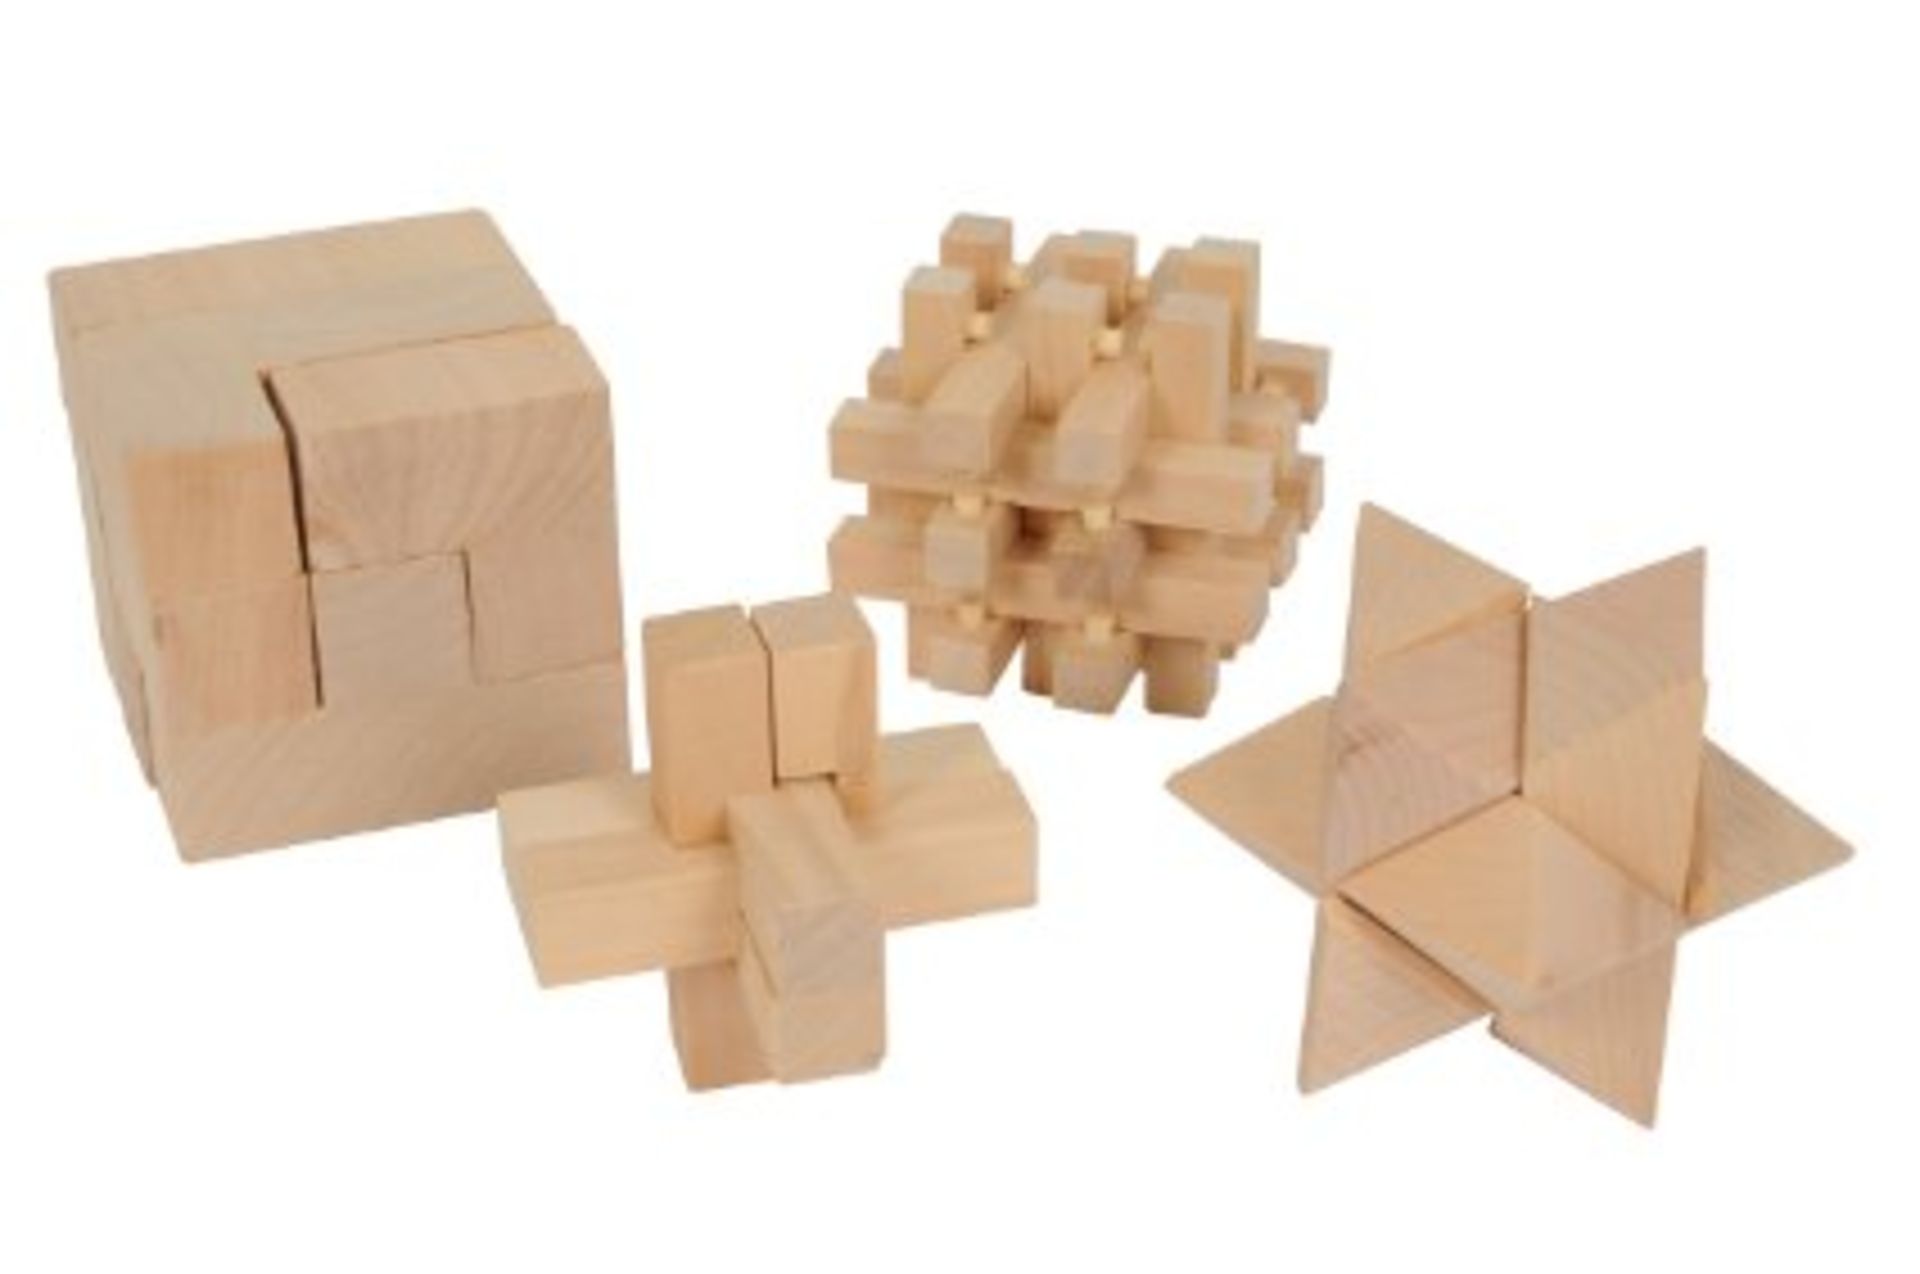 V *TRADE QTY* Brand New Boxed Set Four Quality Wooden Brain Teaser Puzzles ú10.89 on Ebay X 8 YOUR